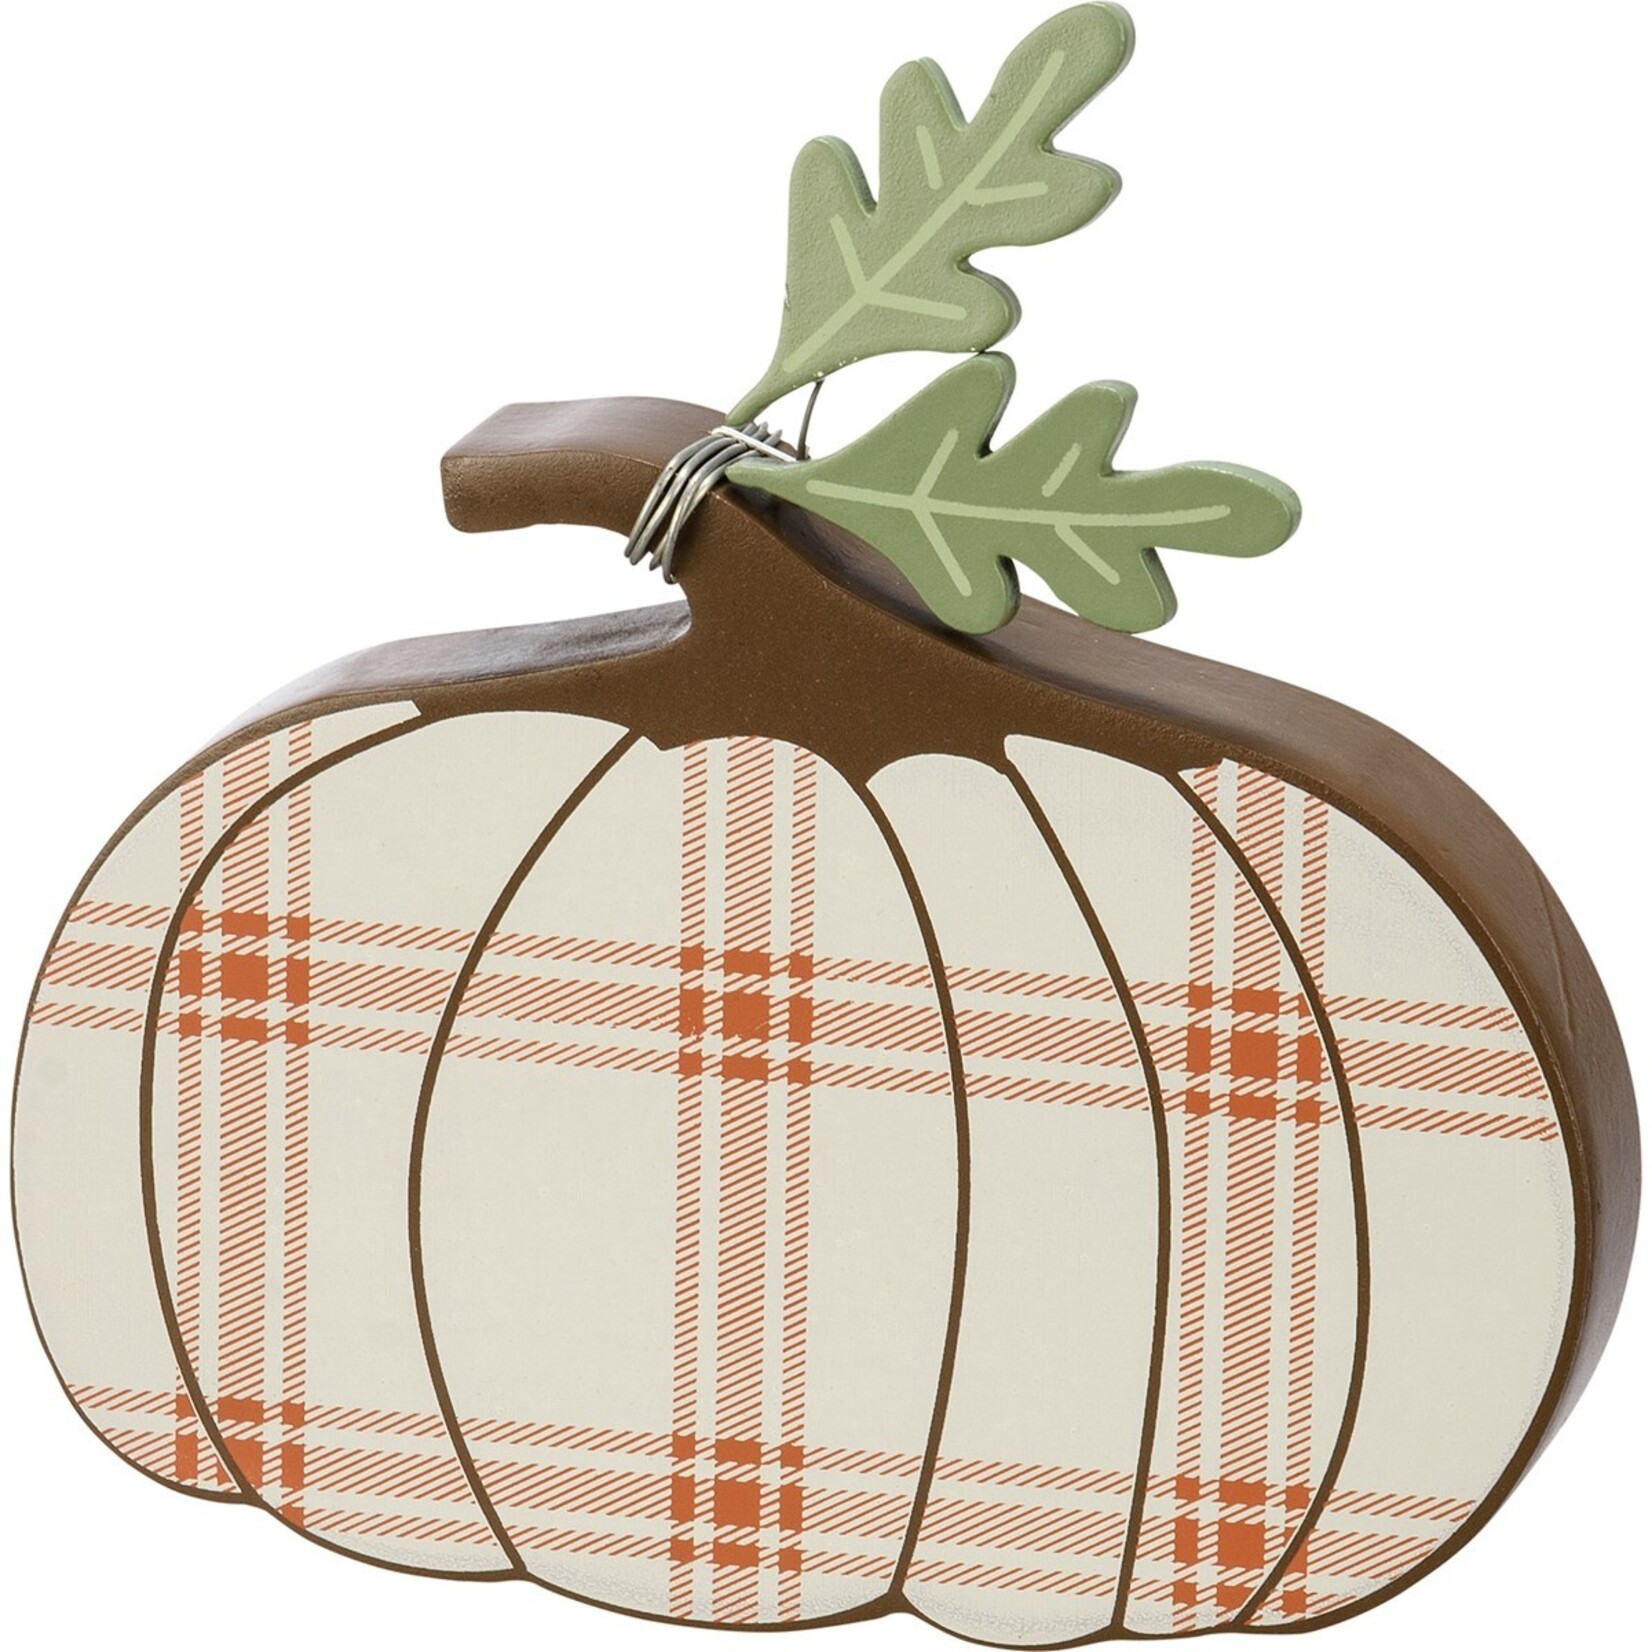 Primitives by Kathy Primitives by Kathy-Cream Plaid Pumpkin Chunky Sitter